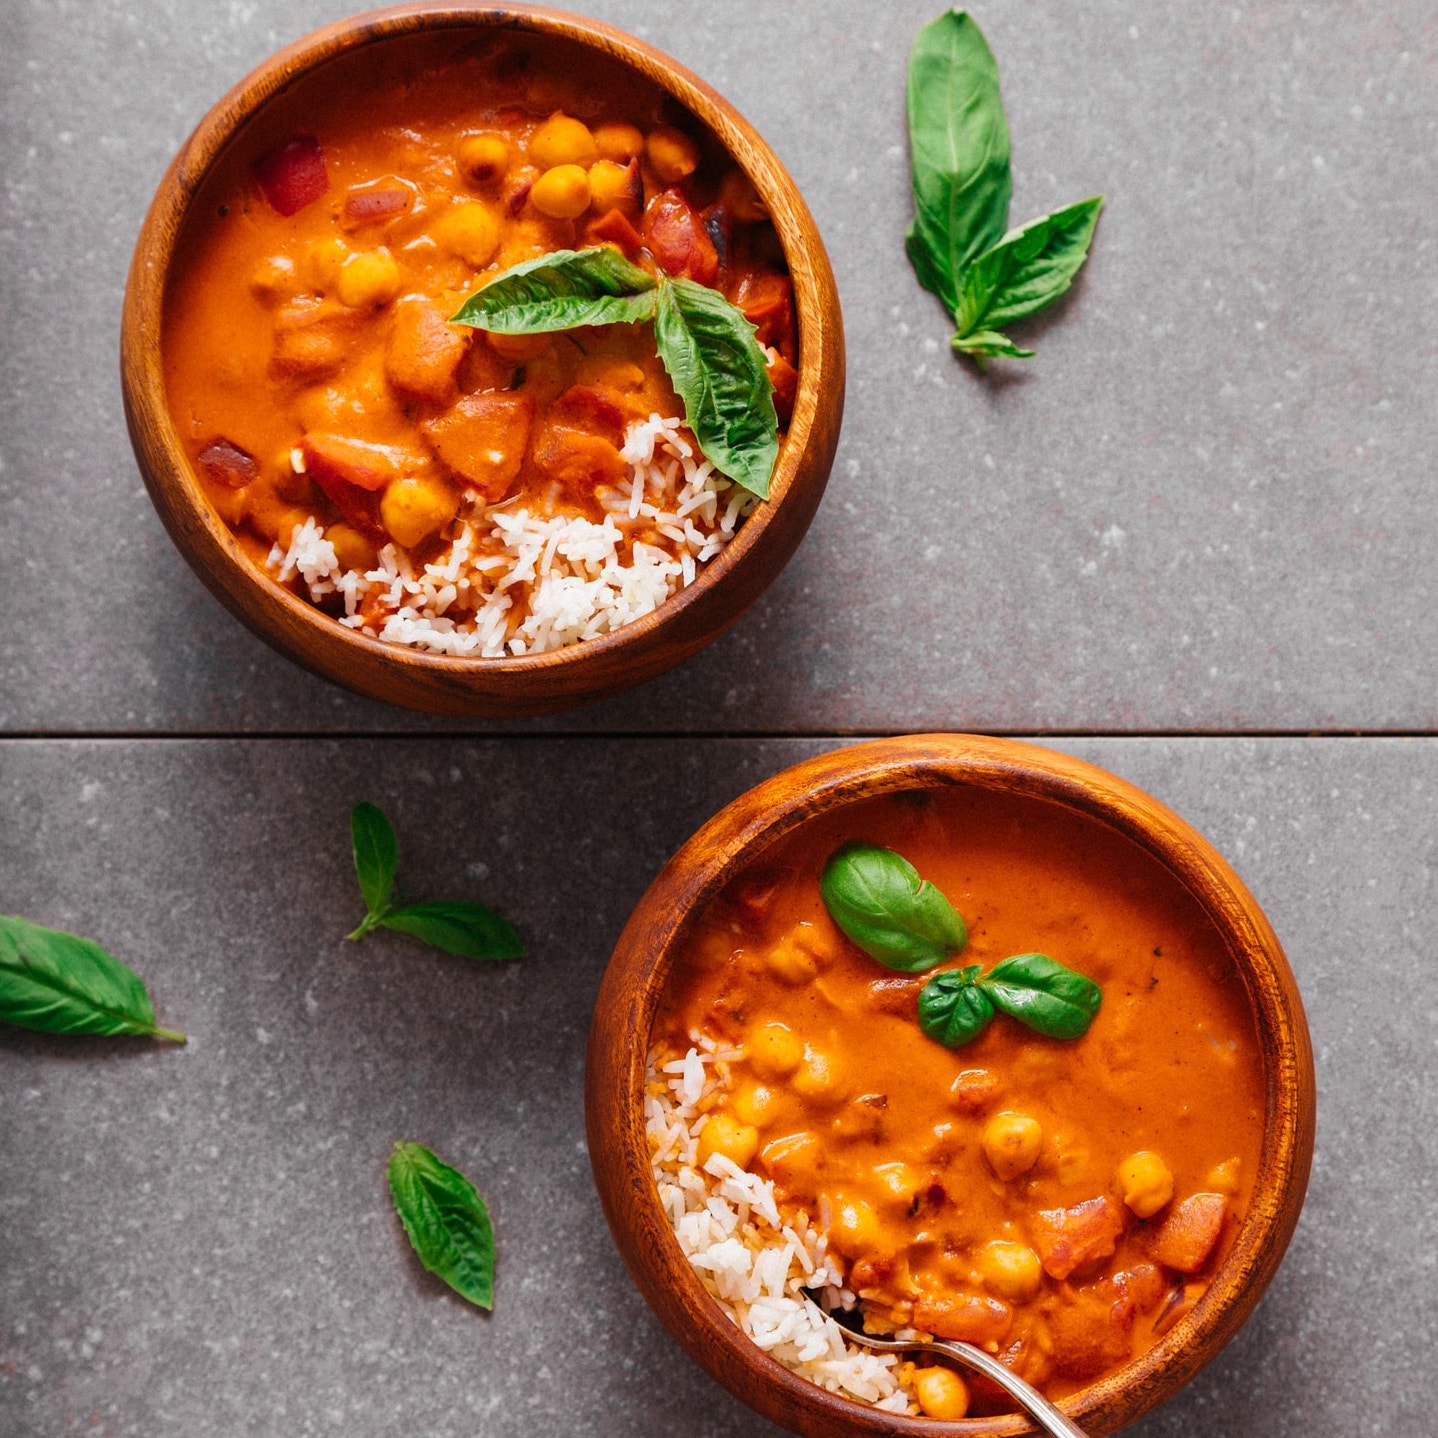 Bowls of Chickpea Tomato Peanut Stew served with rice and fresh basil